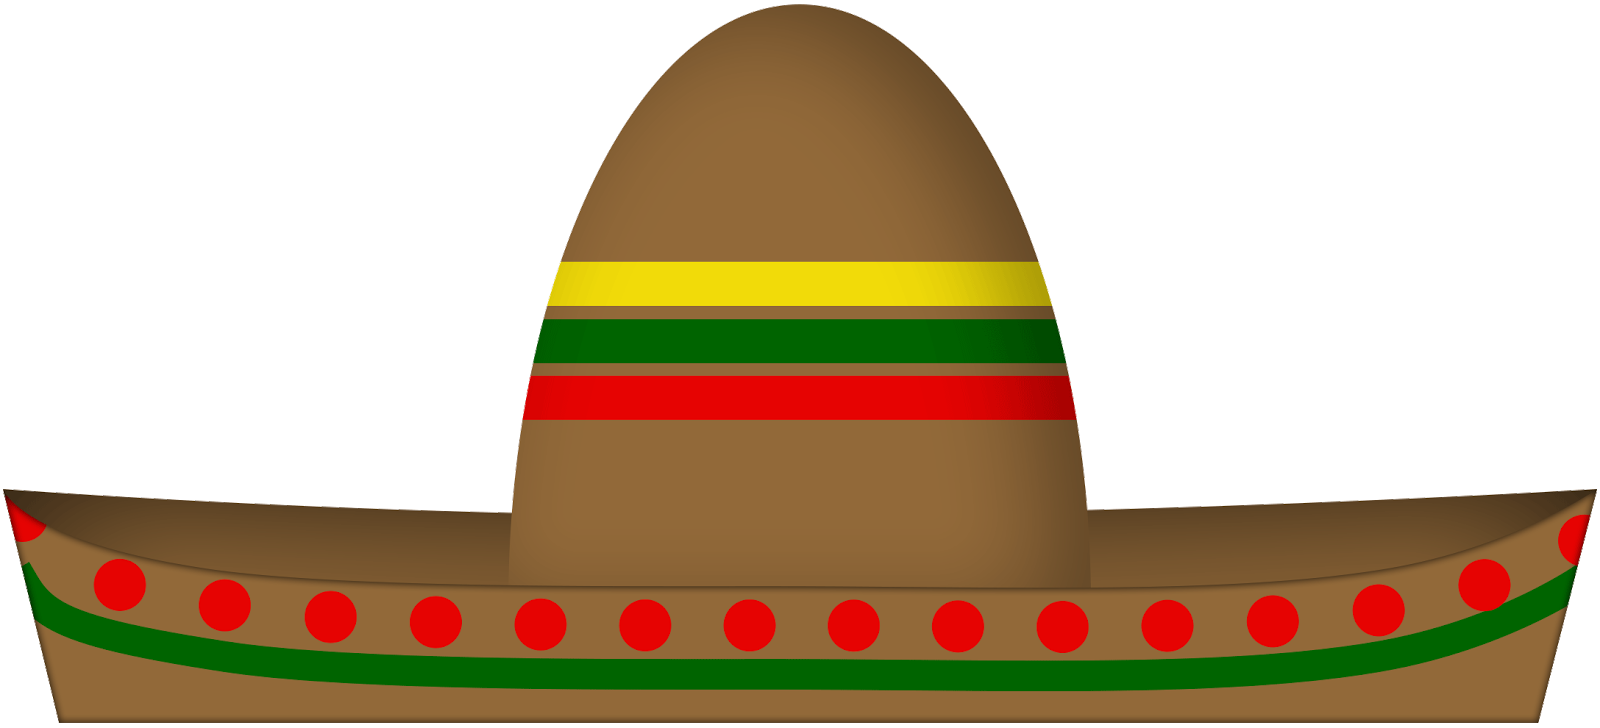 Images For > Sombrero Png - ClipArt Best - ClipArt Best